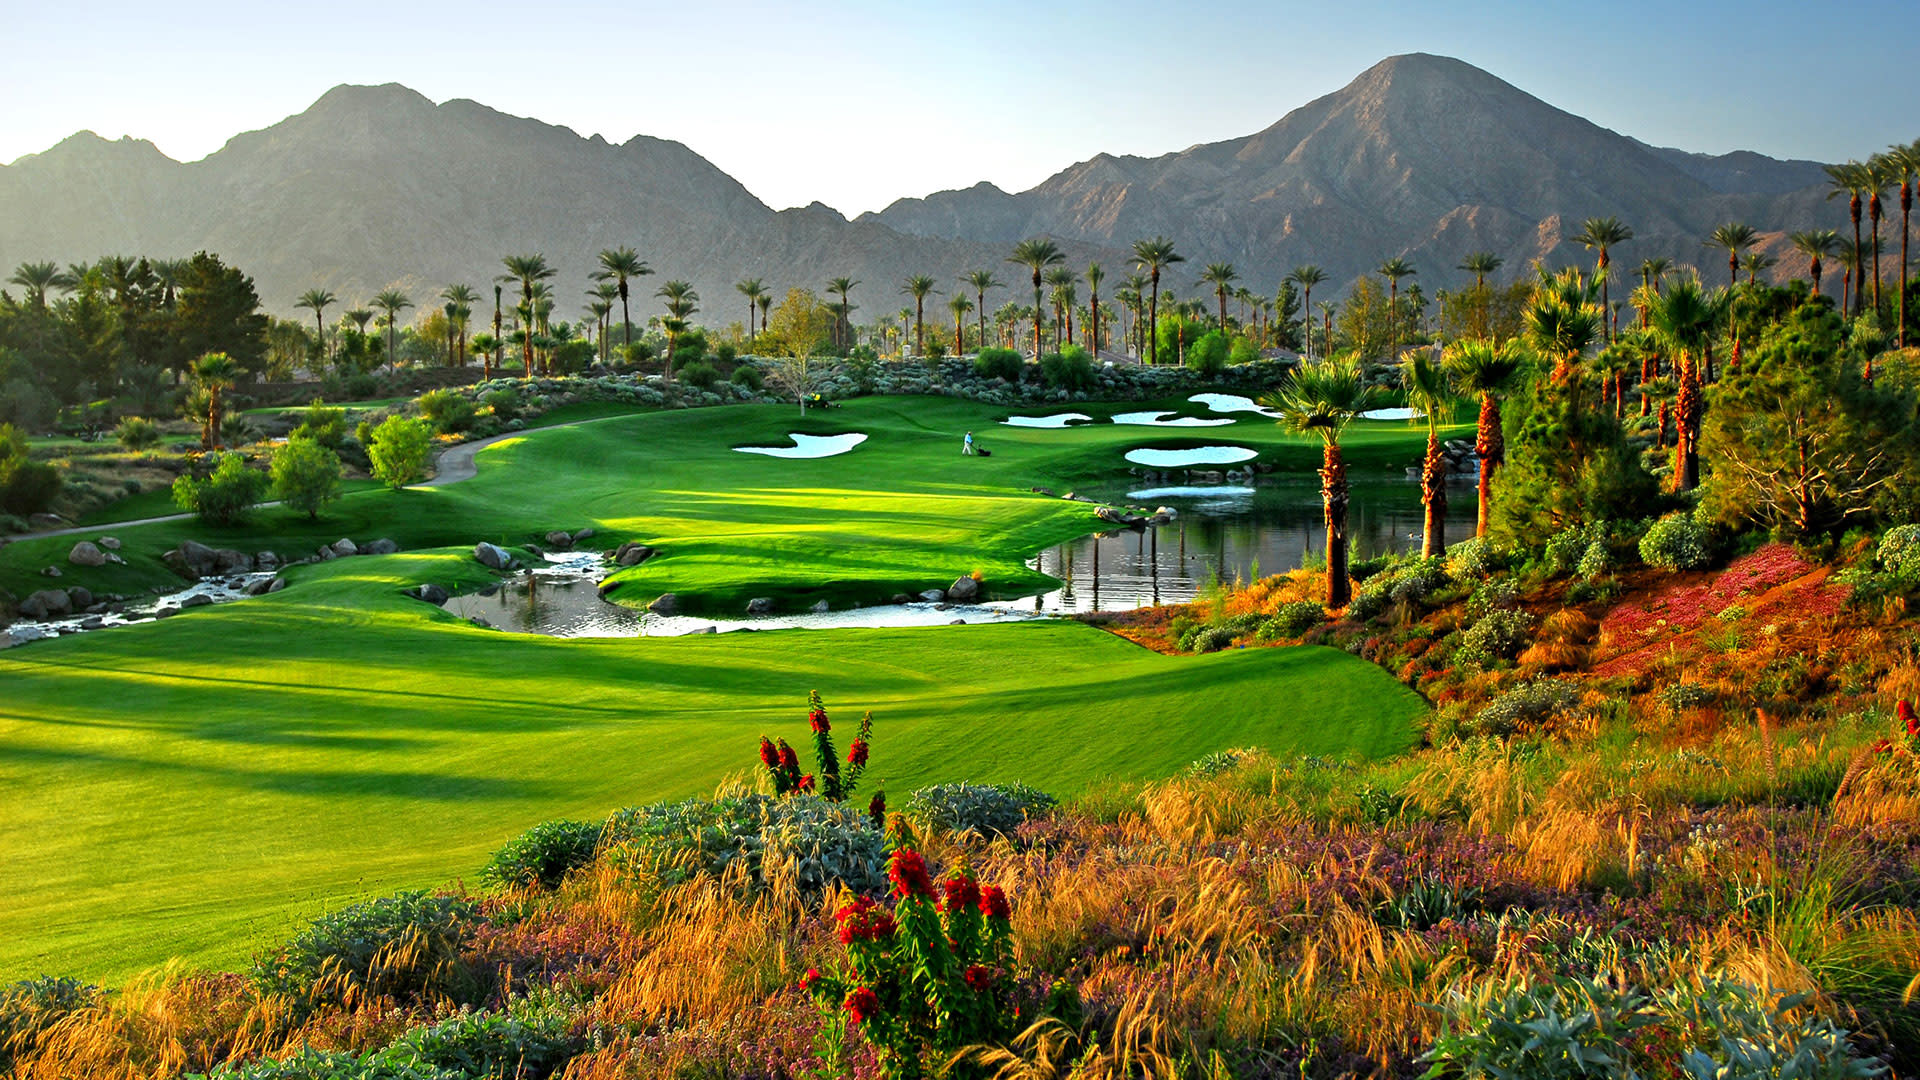 2024 Palm Springs Golf Overseed Schedule - Arizona Golf Vacations